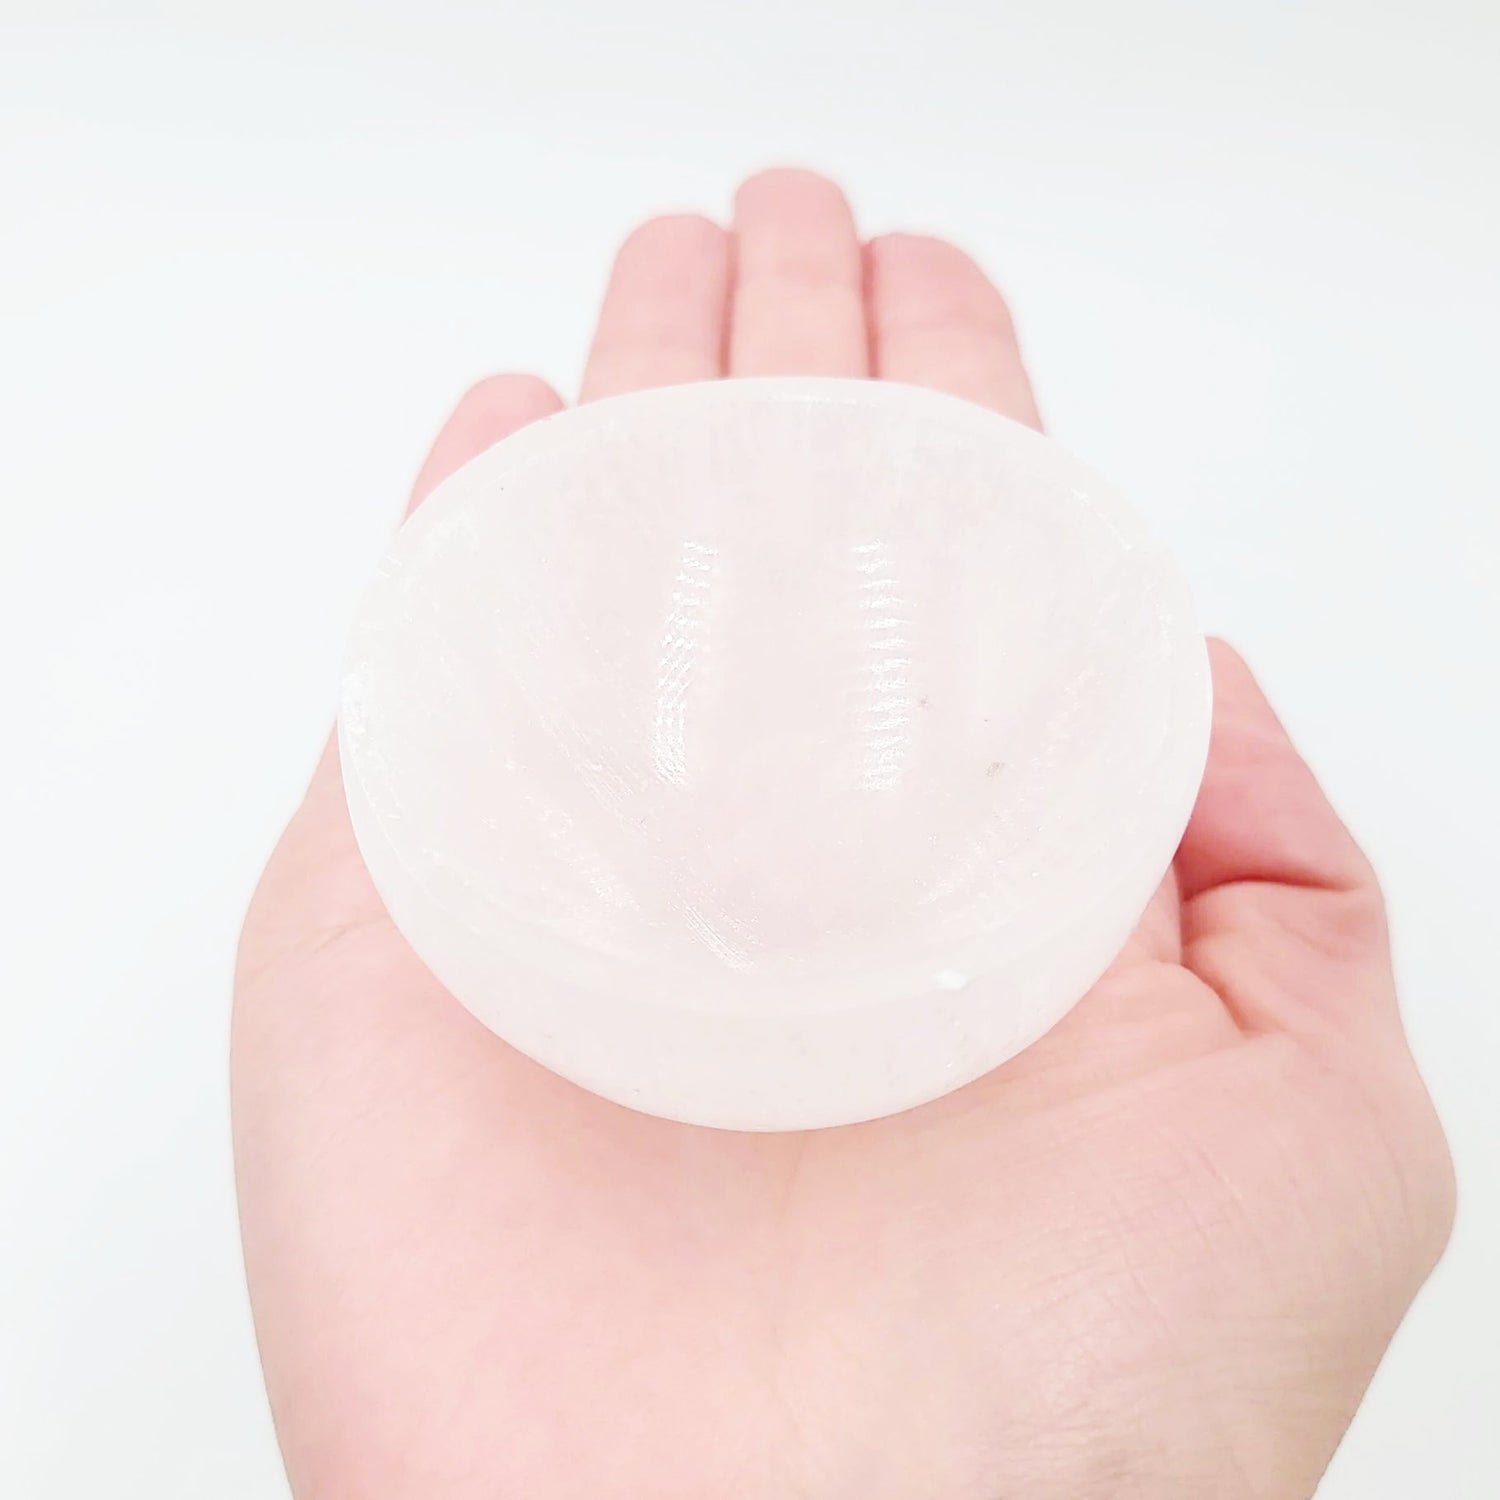 Selenite Bowl Round 2.5" 6.5cm Cleansing Charging Tray - Elevated Metaphysical